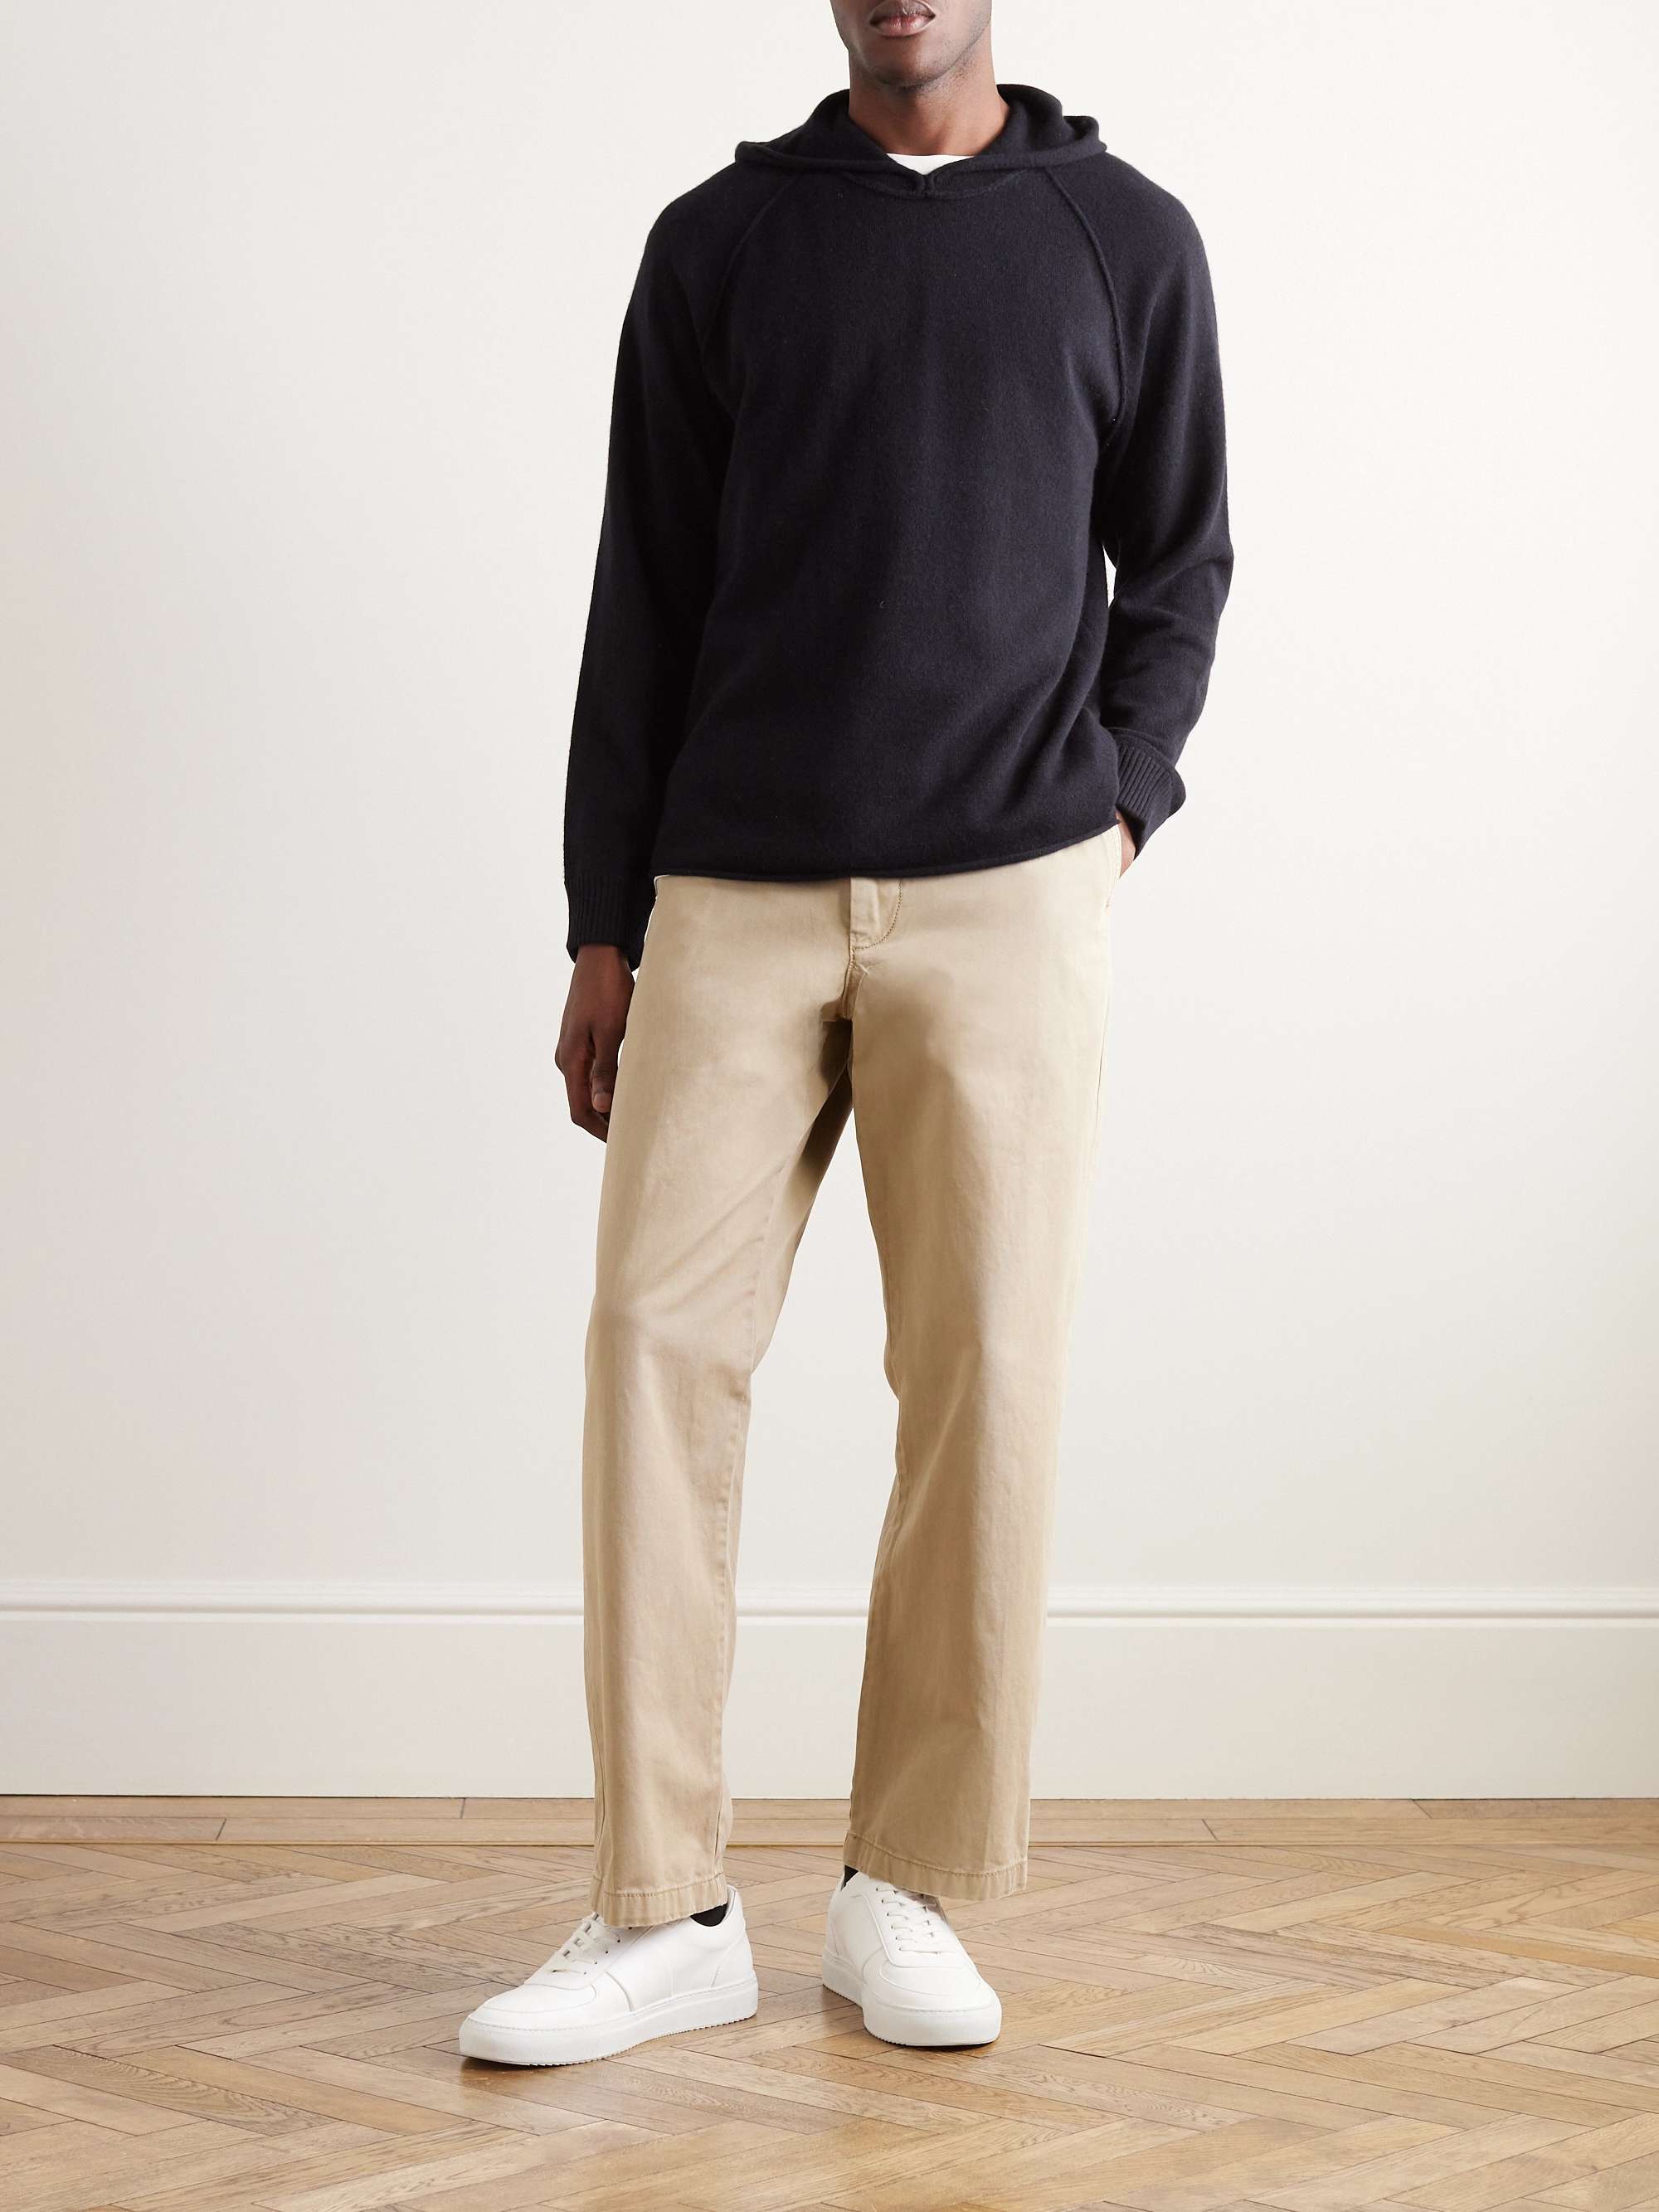 JAMES PERSE Recycled-Cashmere Hoodie for Men | MR PORTER